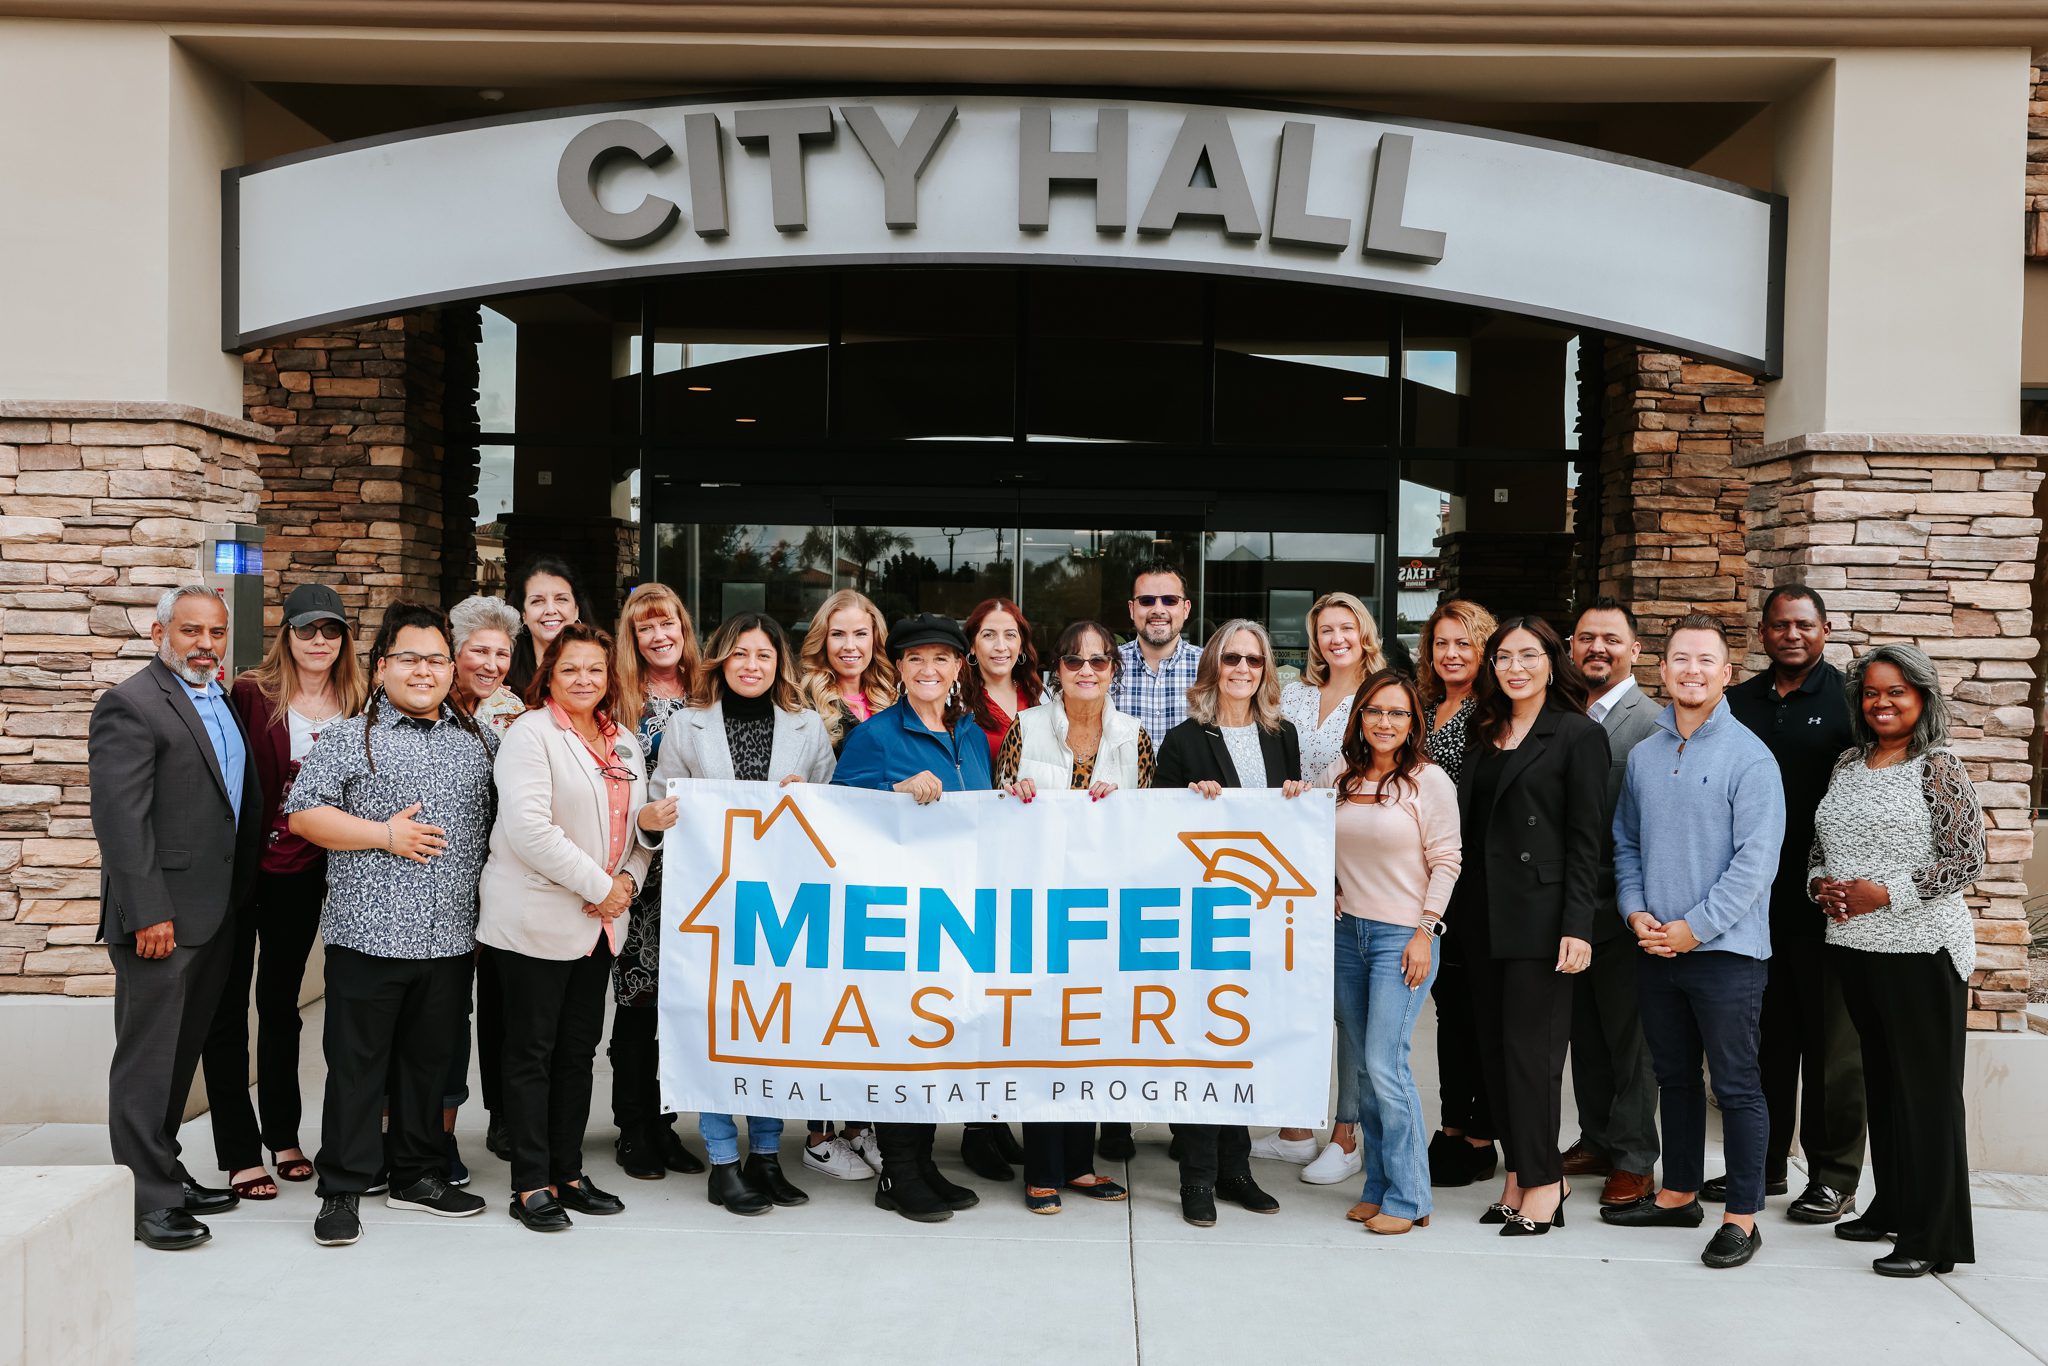 Group of people standing in front of a building labeled "City Hall," holding a banner that reads "Menifee Masters Real Estate Program," showcasing their commitment to the Menifee community.